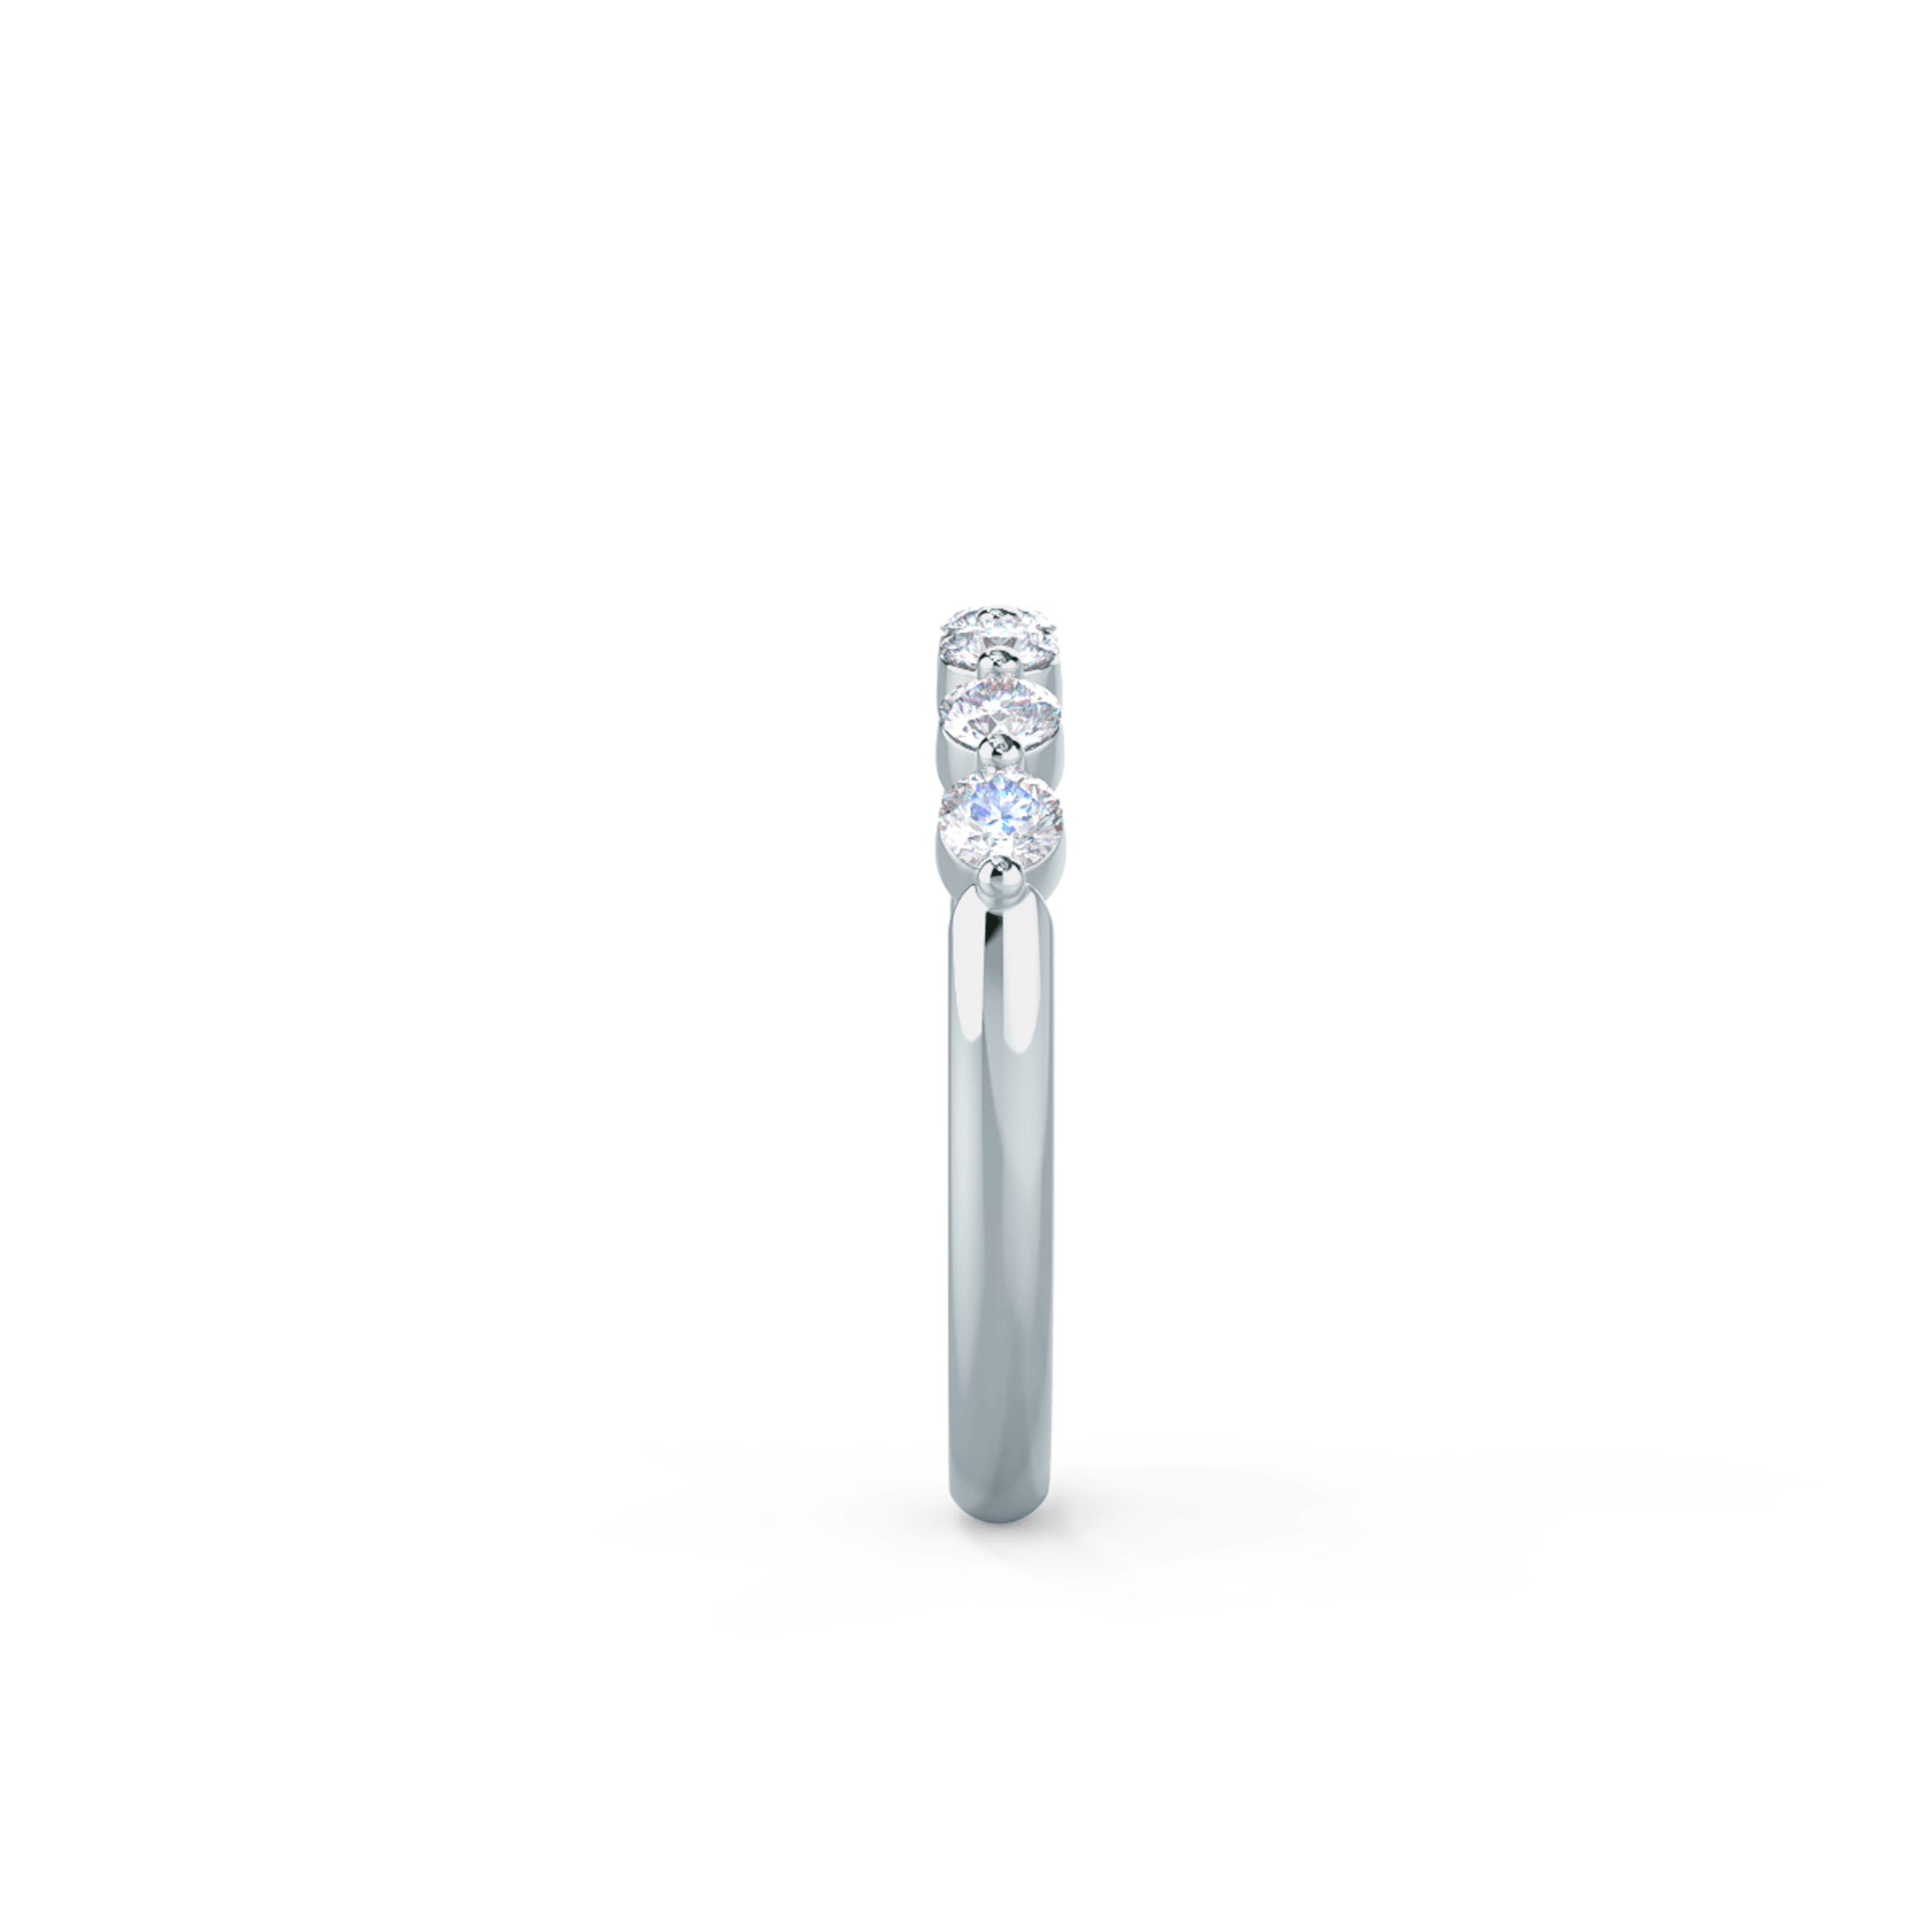 Exceptional Quality 0.55 Carat Round Brilliant Diamonds set in 18k White Gold Shared Prong Seven Stone (Side View)